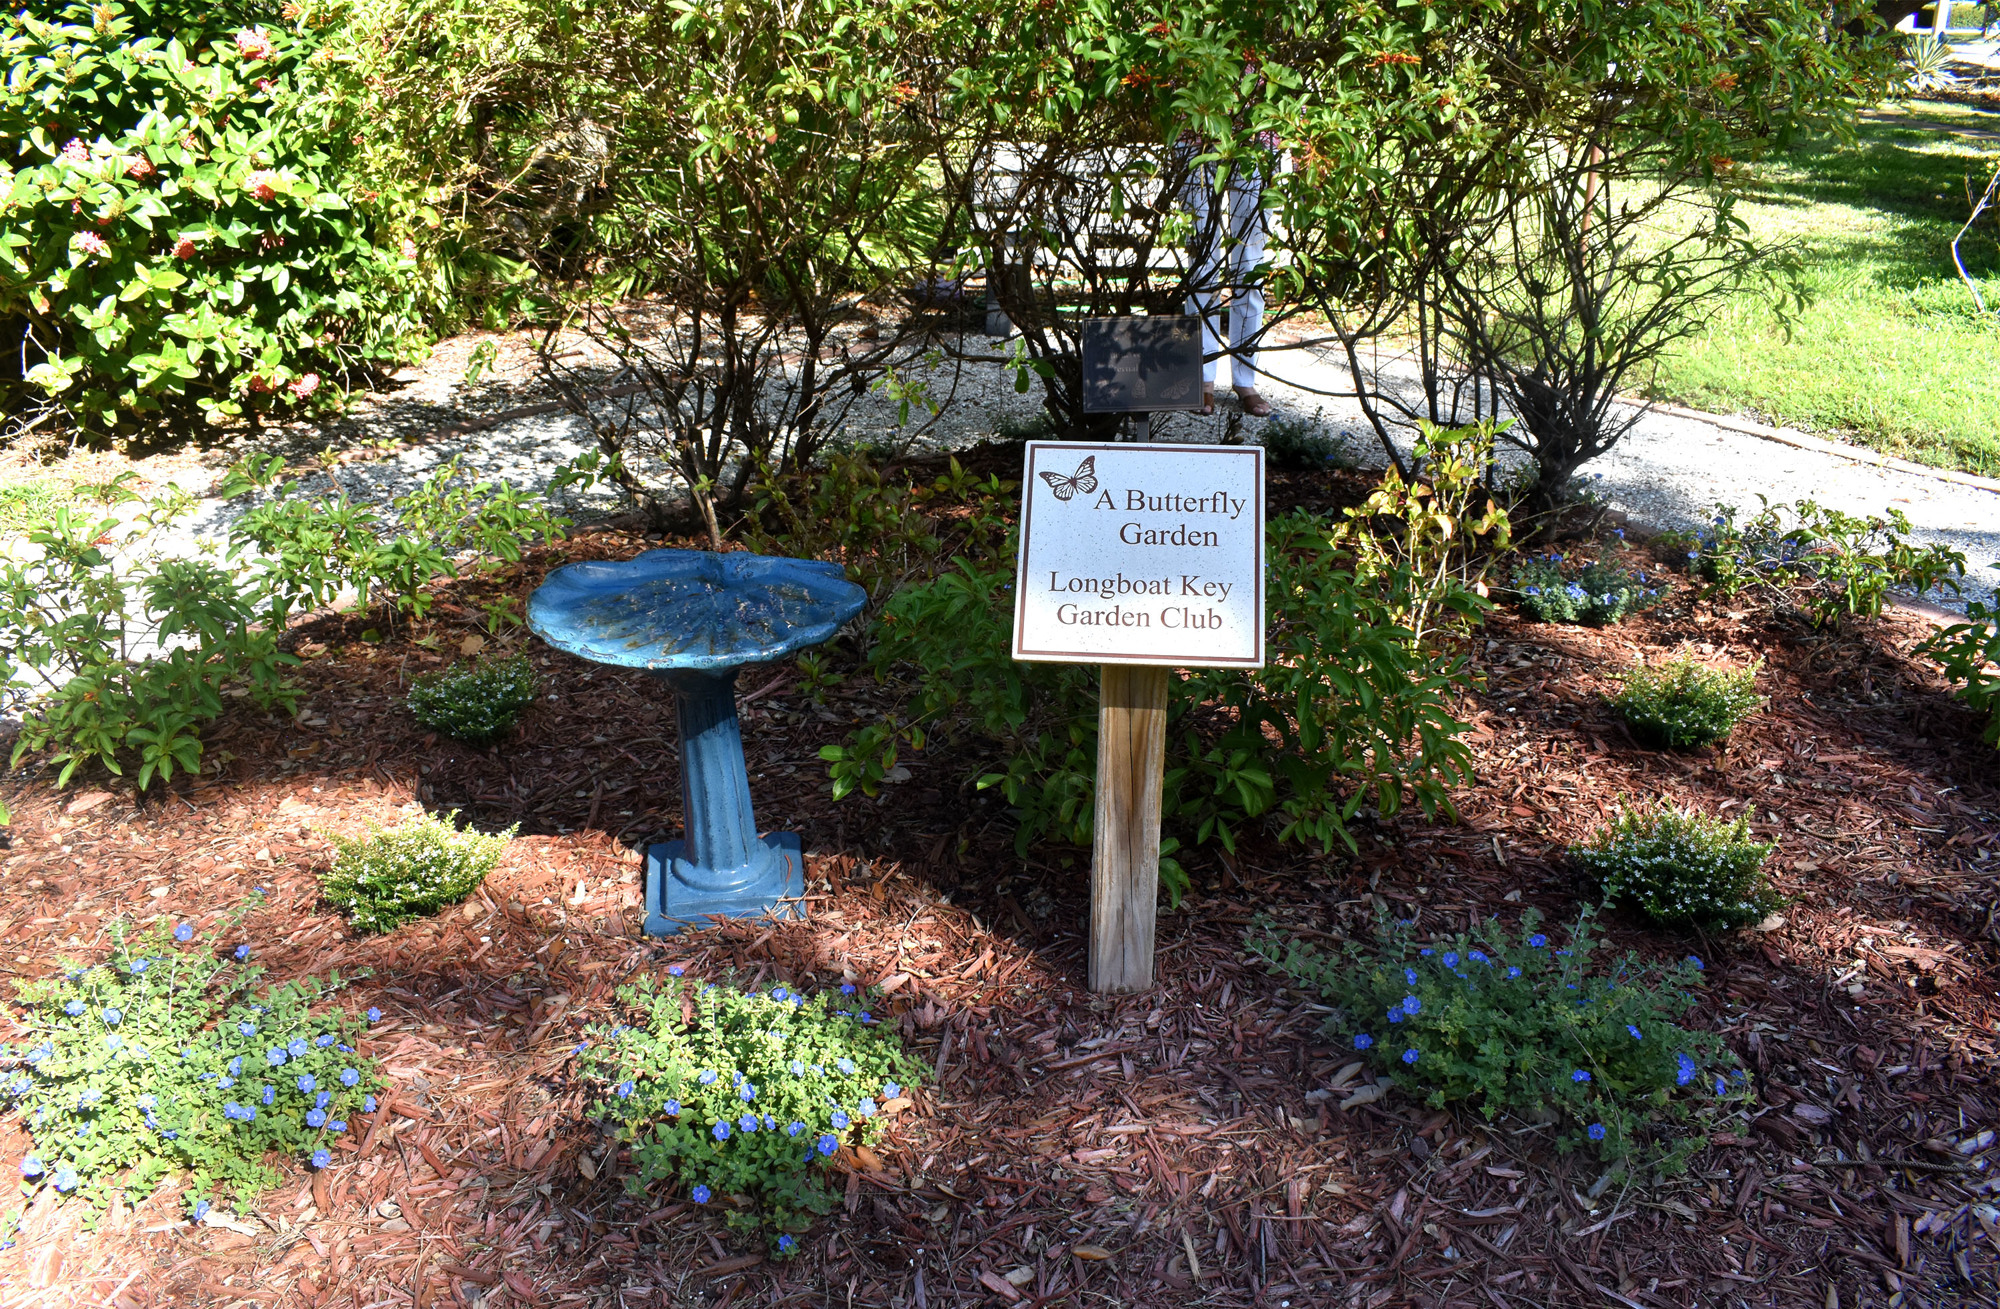 The foliage around the town's butterfly garden has been restored to its conditions since before the storm.